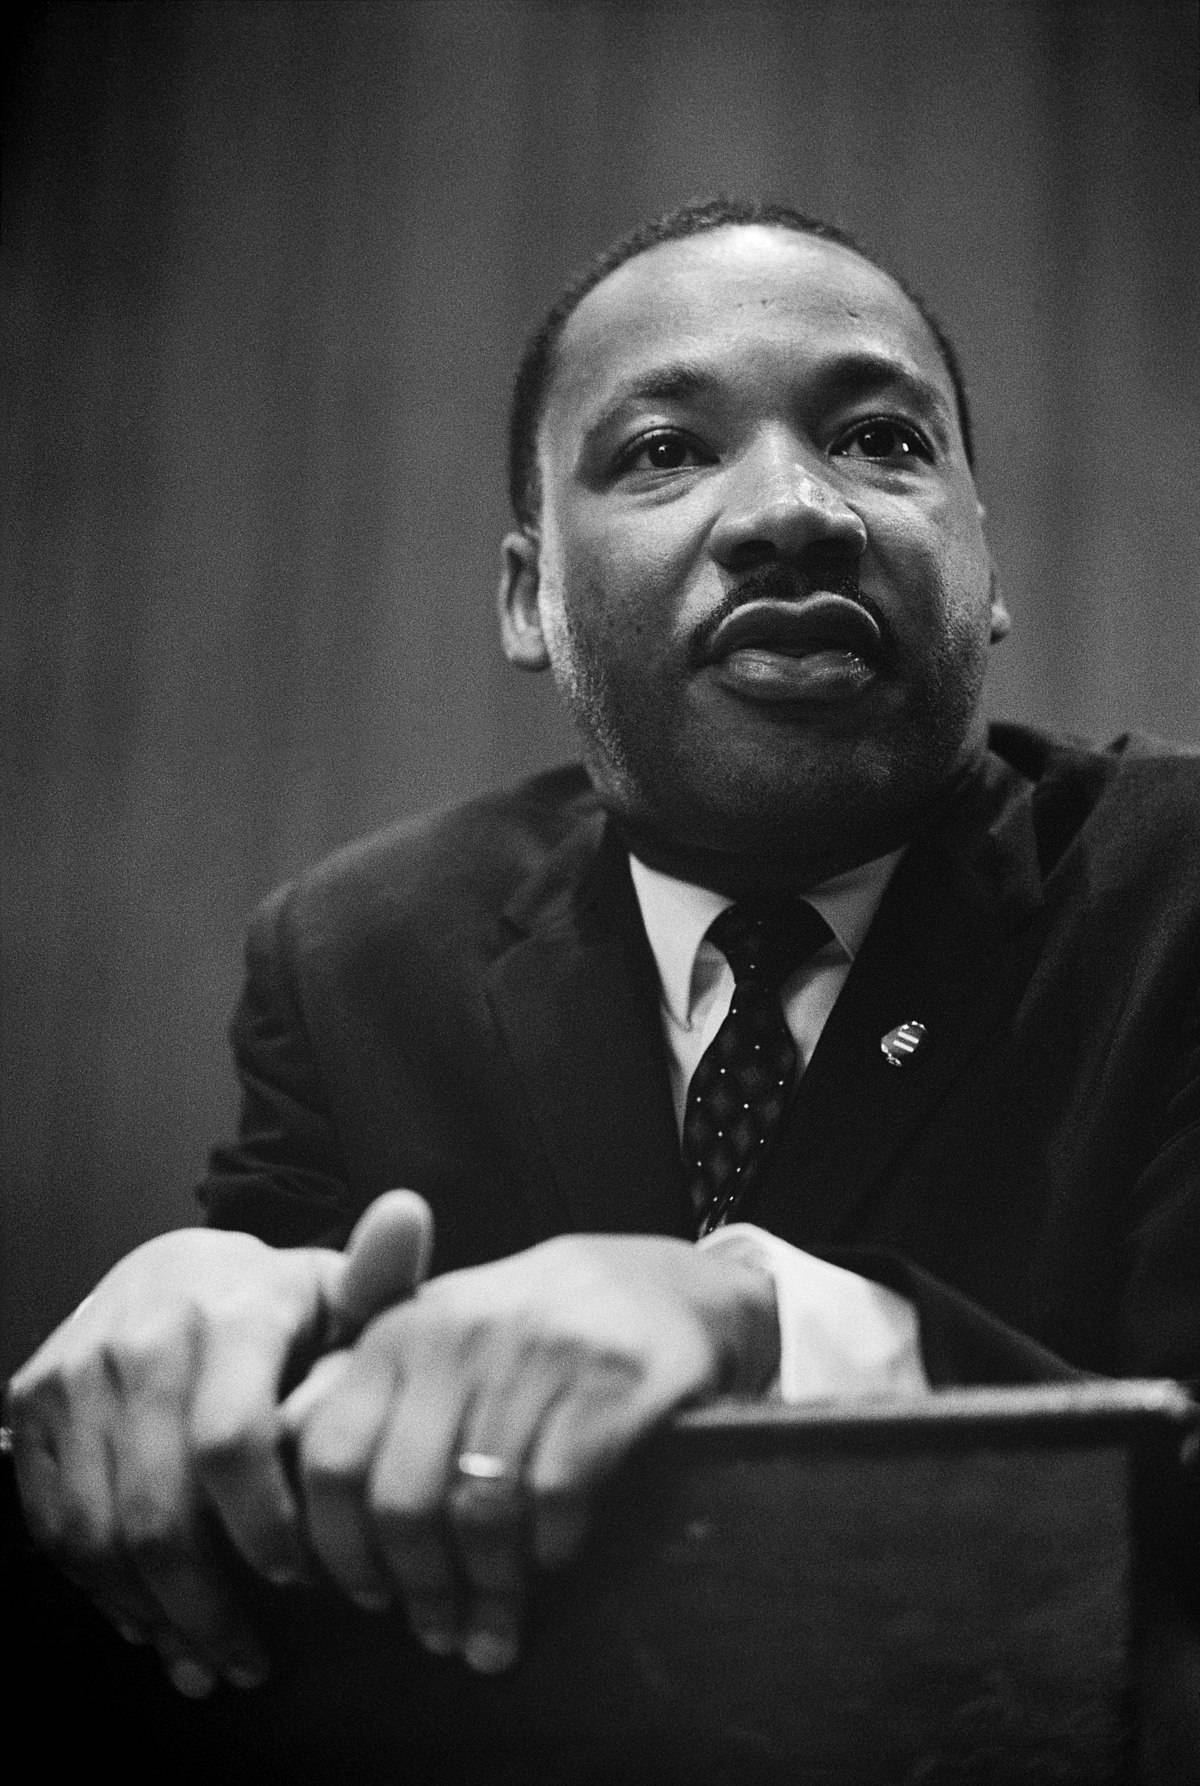 Martin Luther King Jr. Speaking Passionately At A Public Event Wallpaper